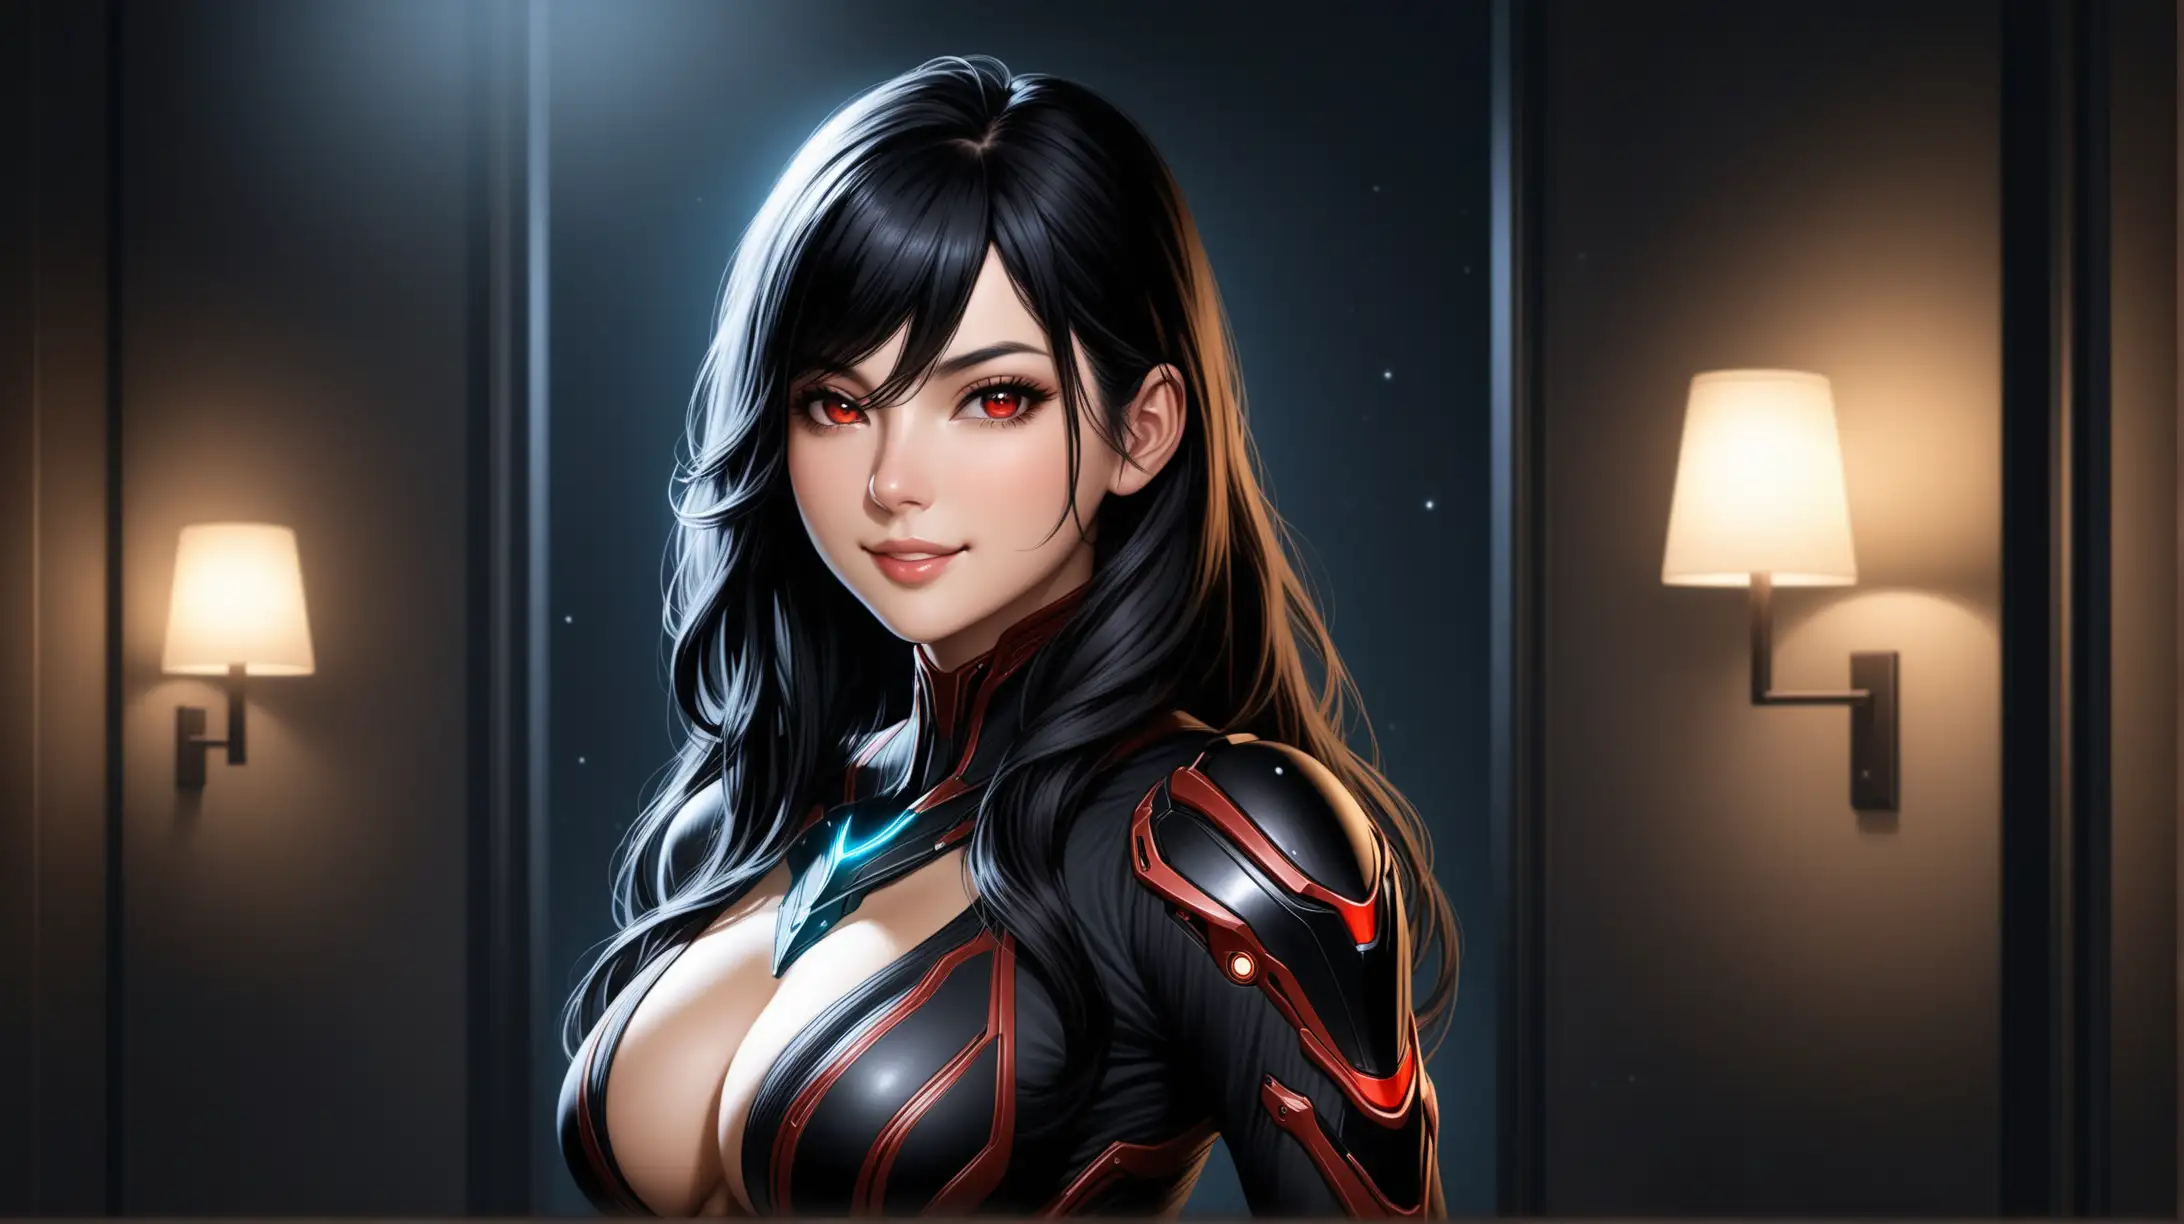 Draw a woman, long wavy black hair, ahoge, red eyes, shapely figure, high quality, realistic, accurate, detailed, long shot, night lighting, indoors, outfit inspired from Warframe, seductive pose, smiling toward the viewer